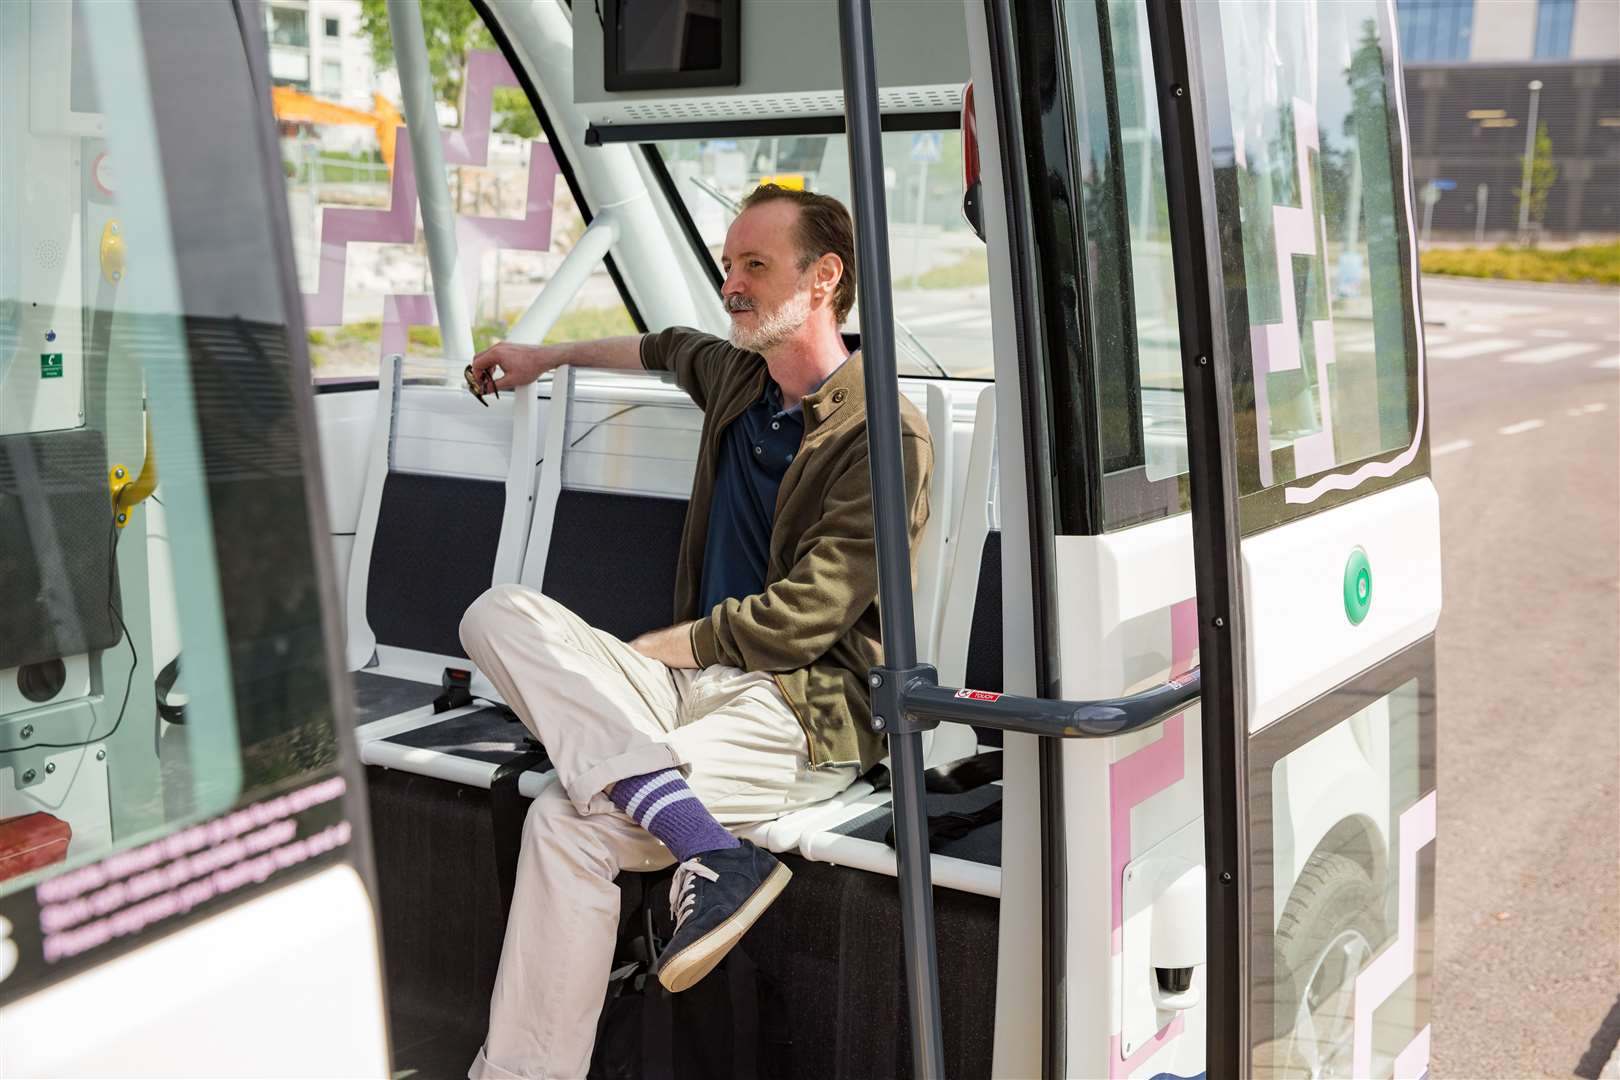 Interior of automated remotely operated bus in Helsinki. Unmanned public transport test on street. Passenger sitting on seat, waiting on bus stop.